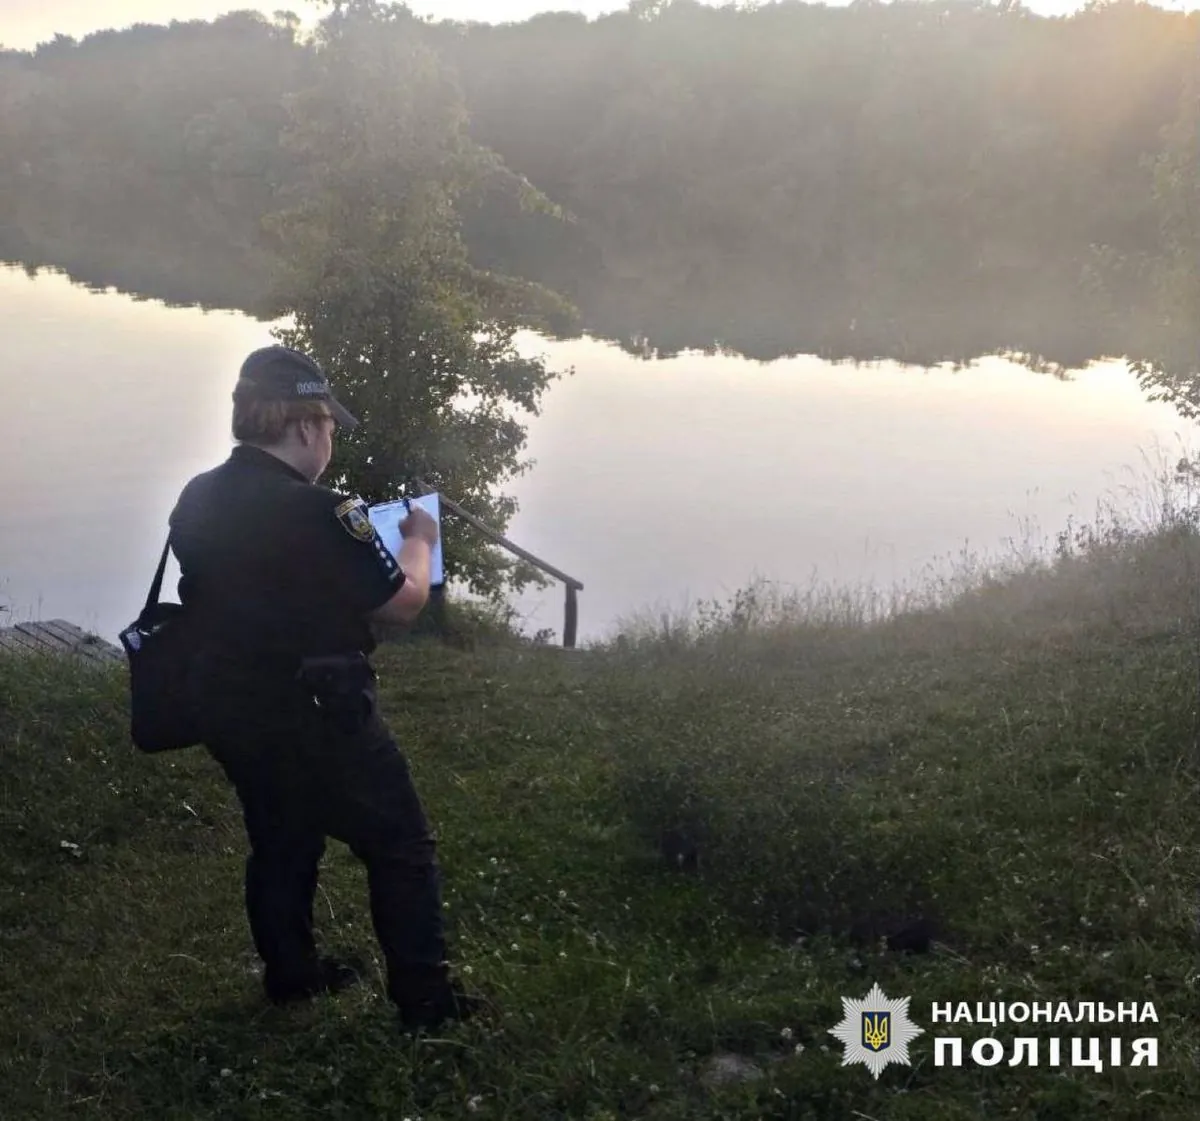 body-of-drowned-man-found-in-river-in-kyiv-region